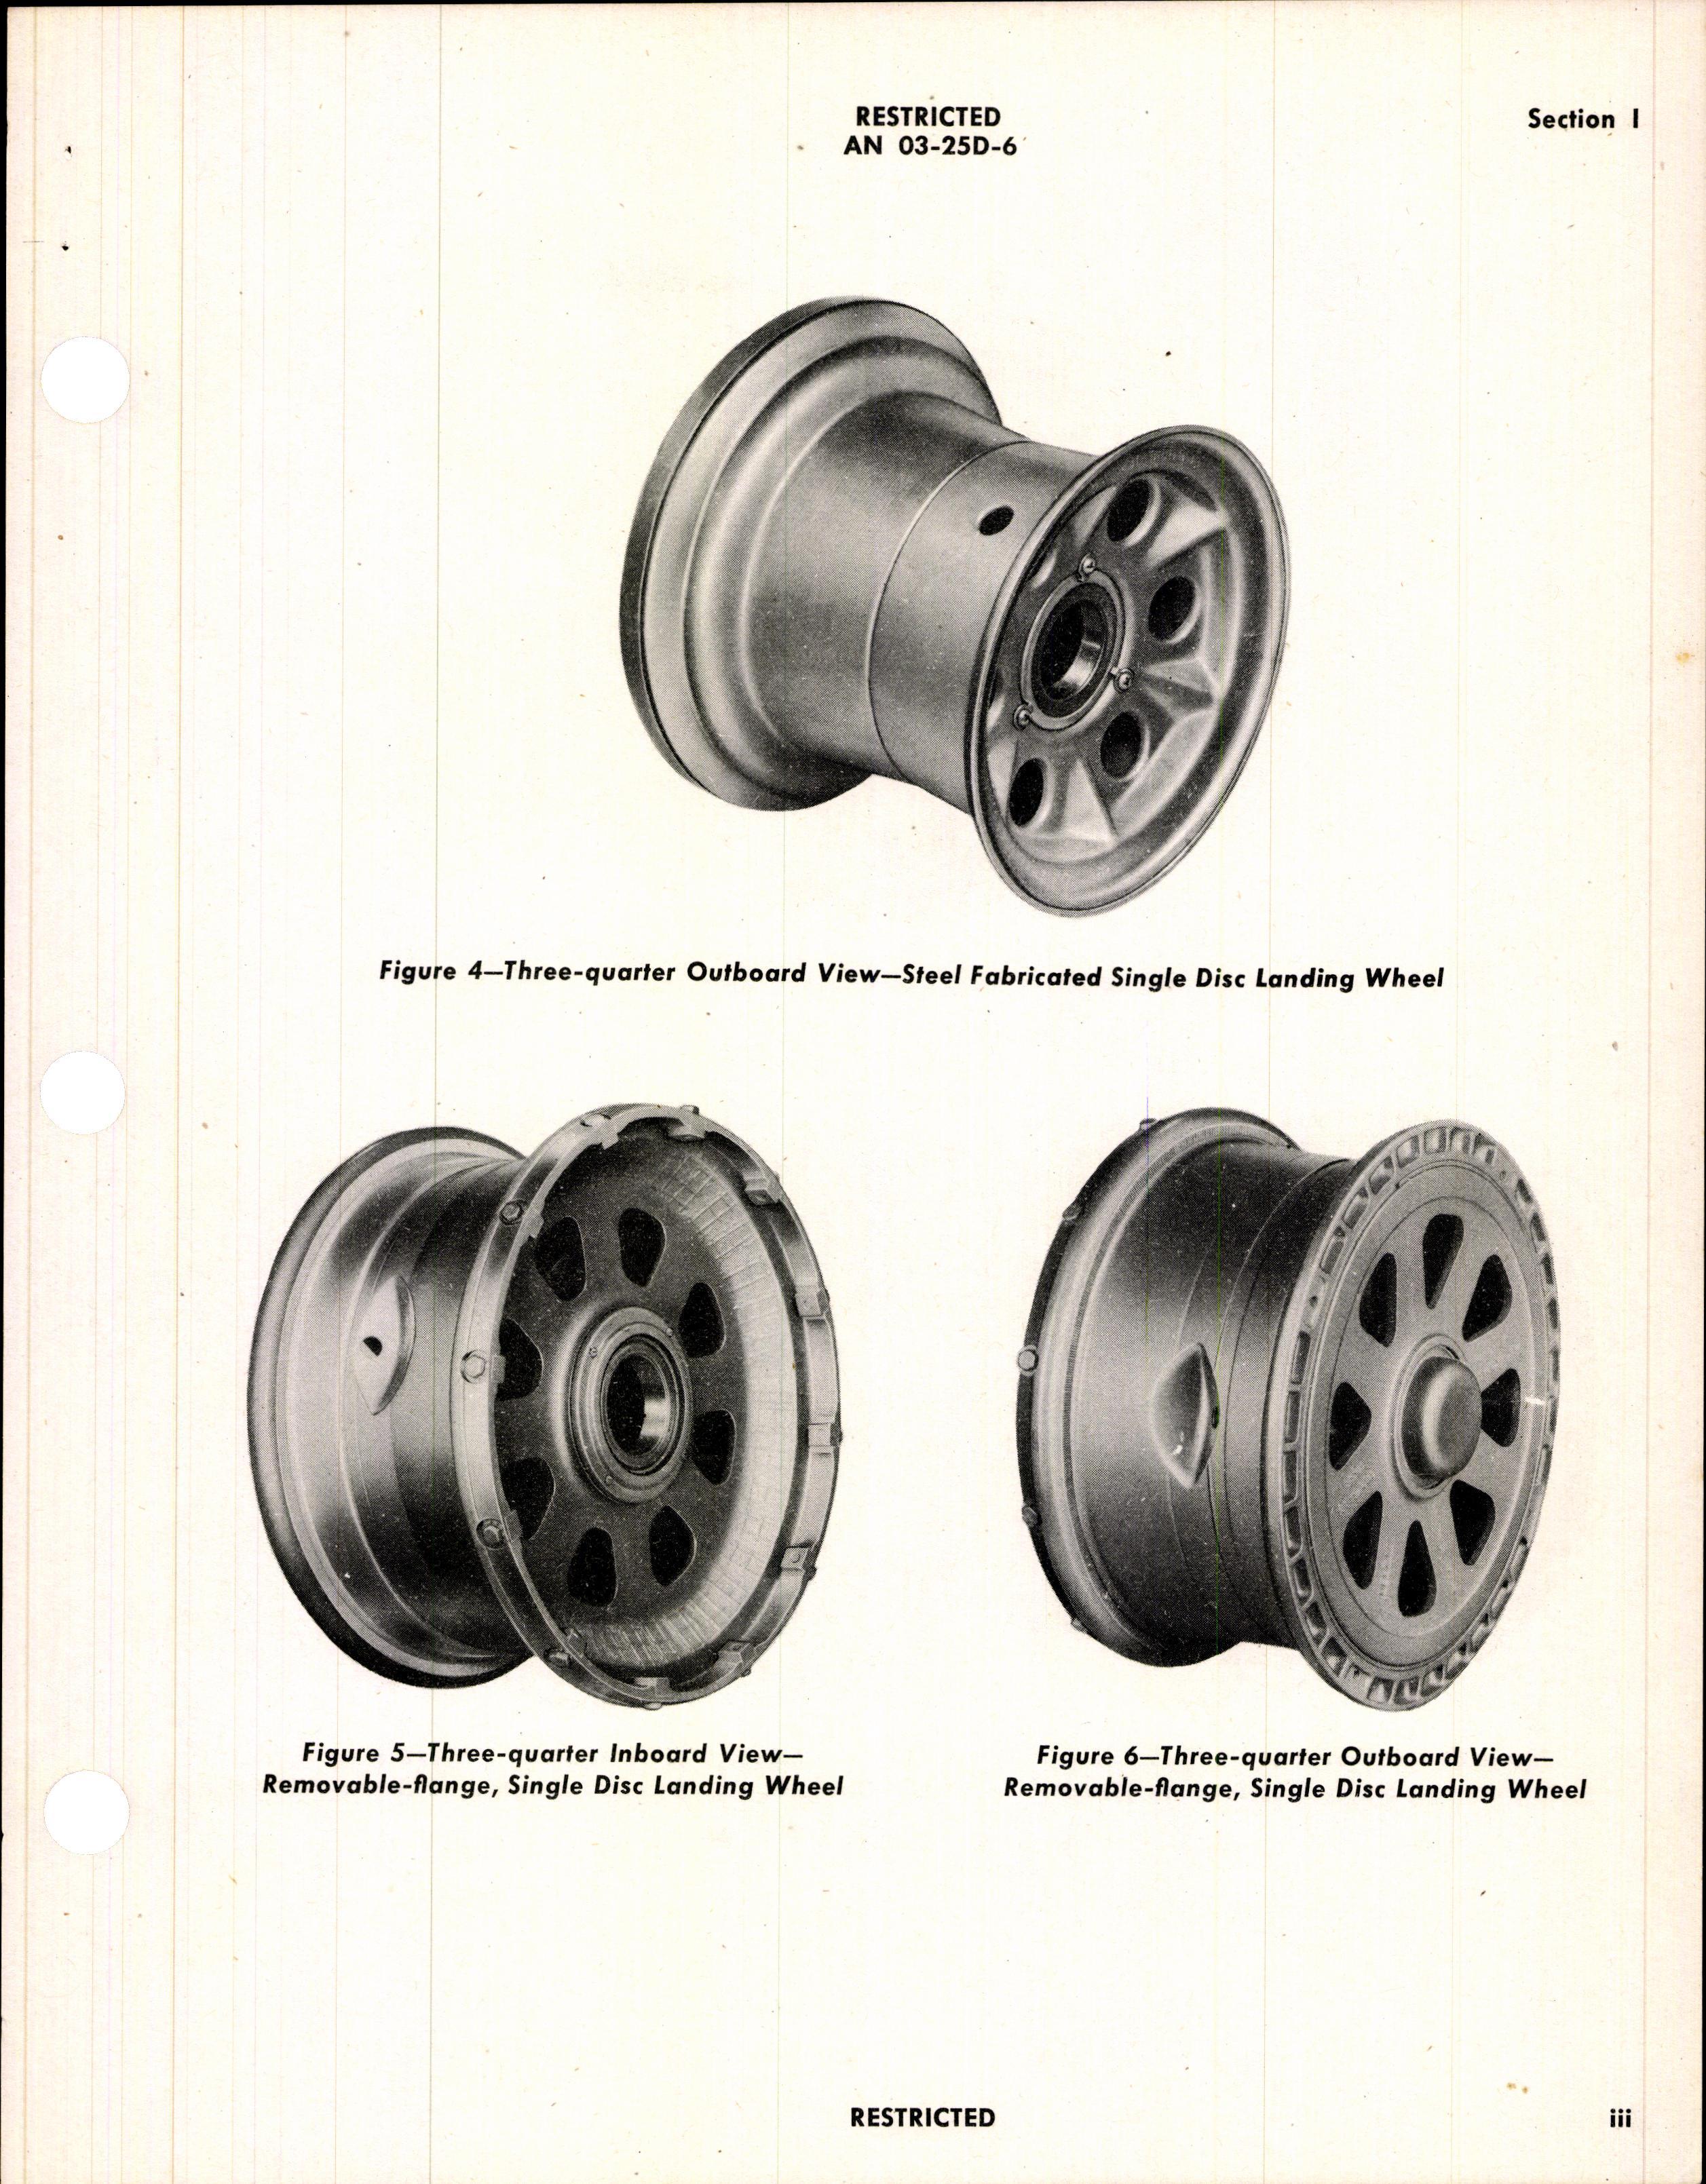 Sample page 5 from AirCorps Library document: Handbook of Instructions with Parts Catalog for Landing Wheels For Use With Single Disc Brakes